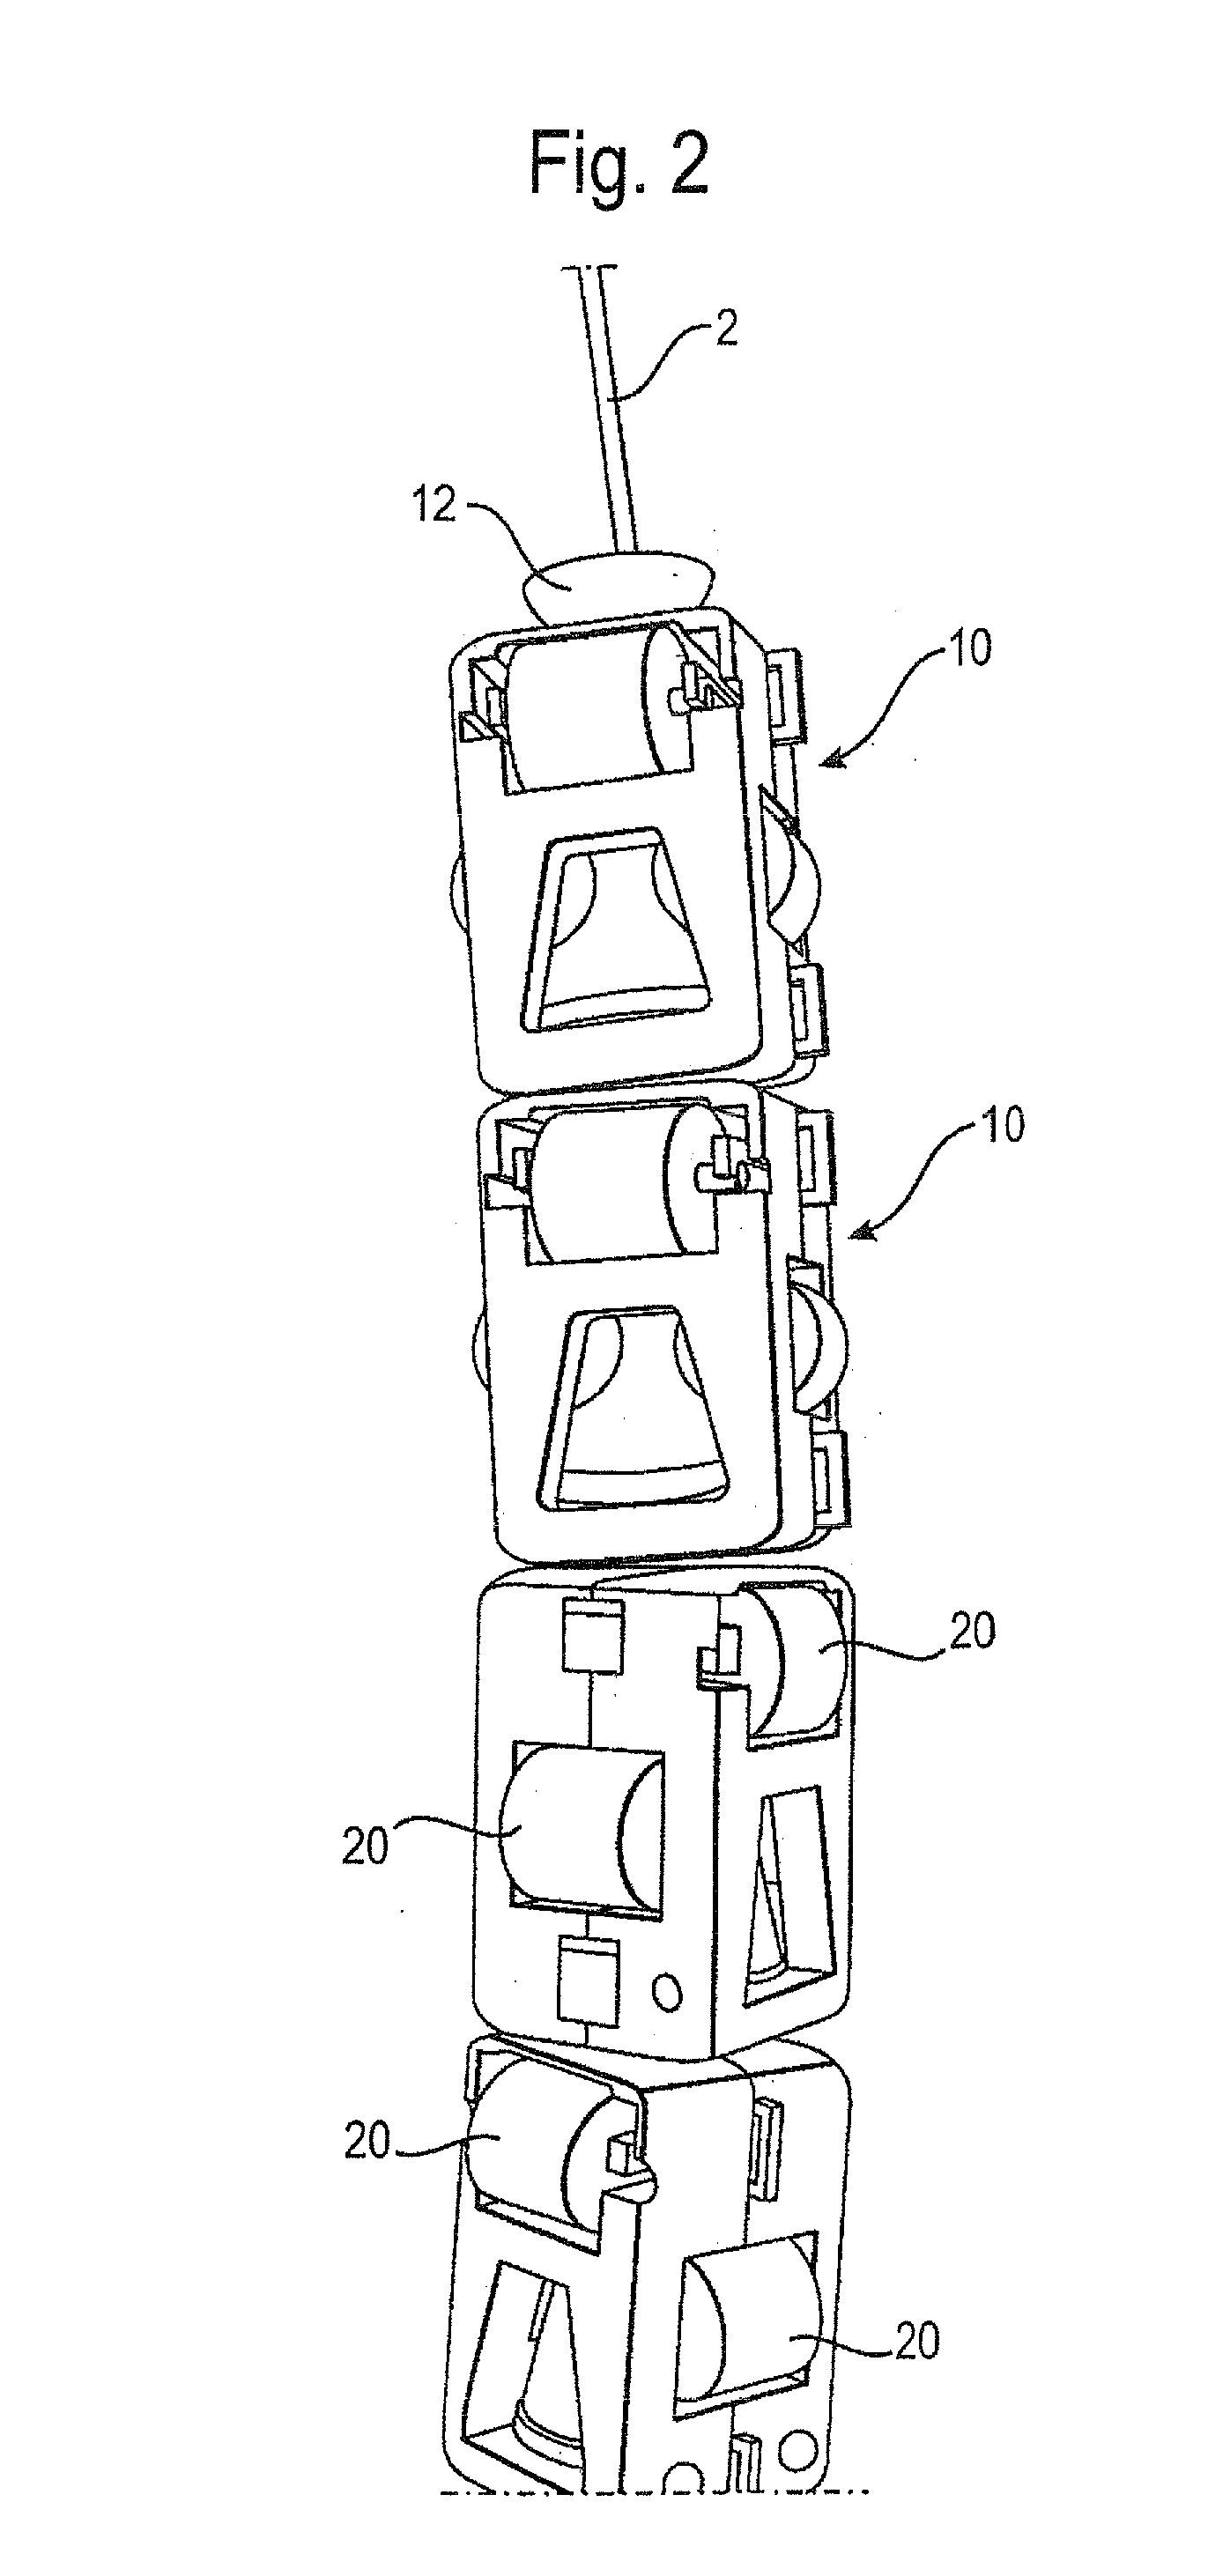 Feeding system for a welding wire for a submerged welding process